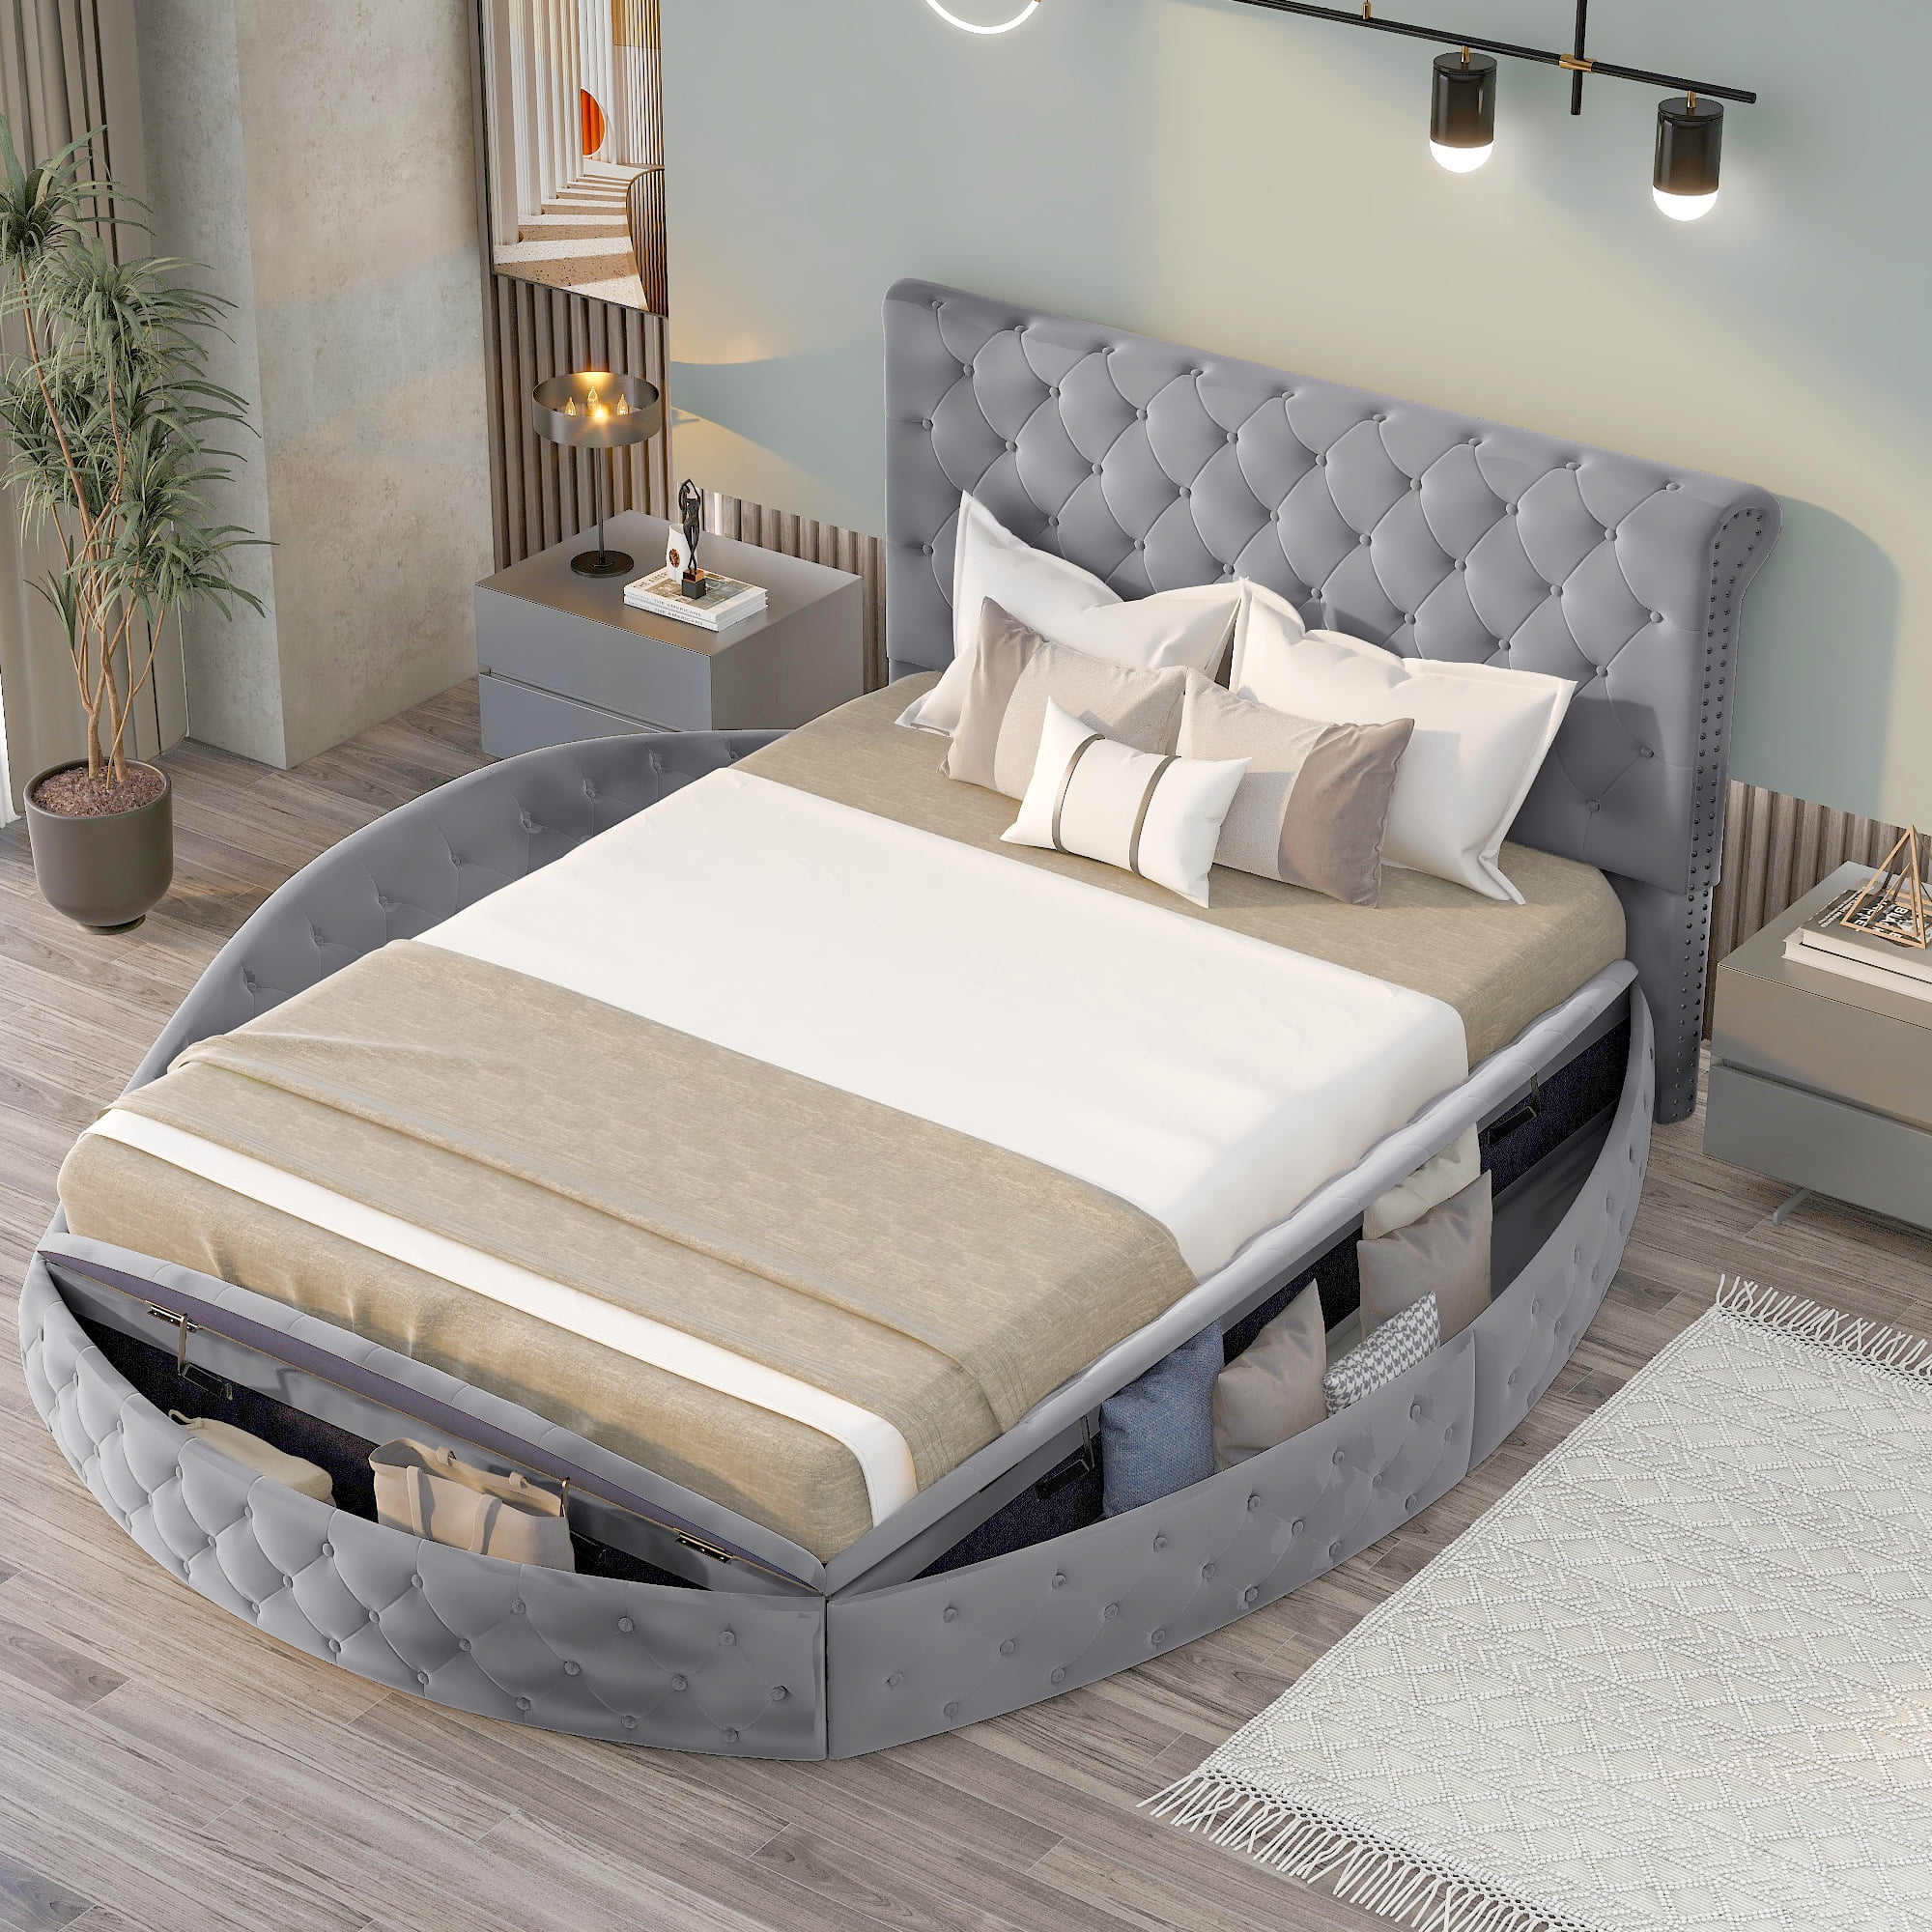 EUROCO Upholstery Low Profile Platform Round Tufted Bed with Storage